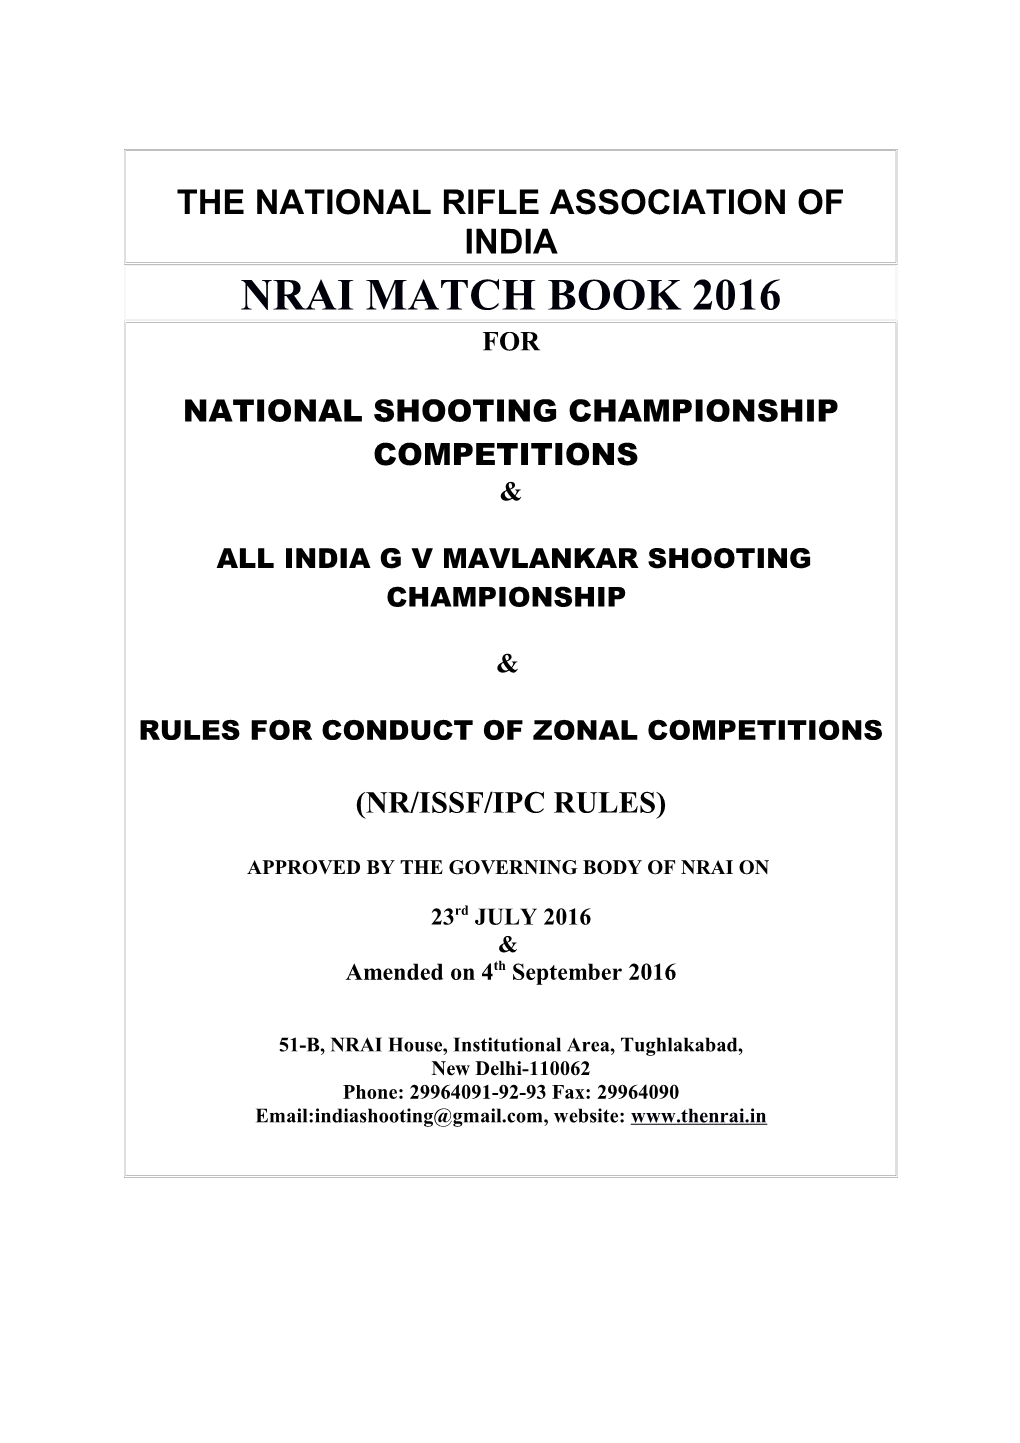 The National Rifle Association of India